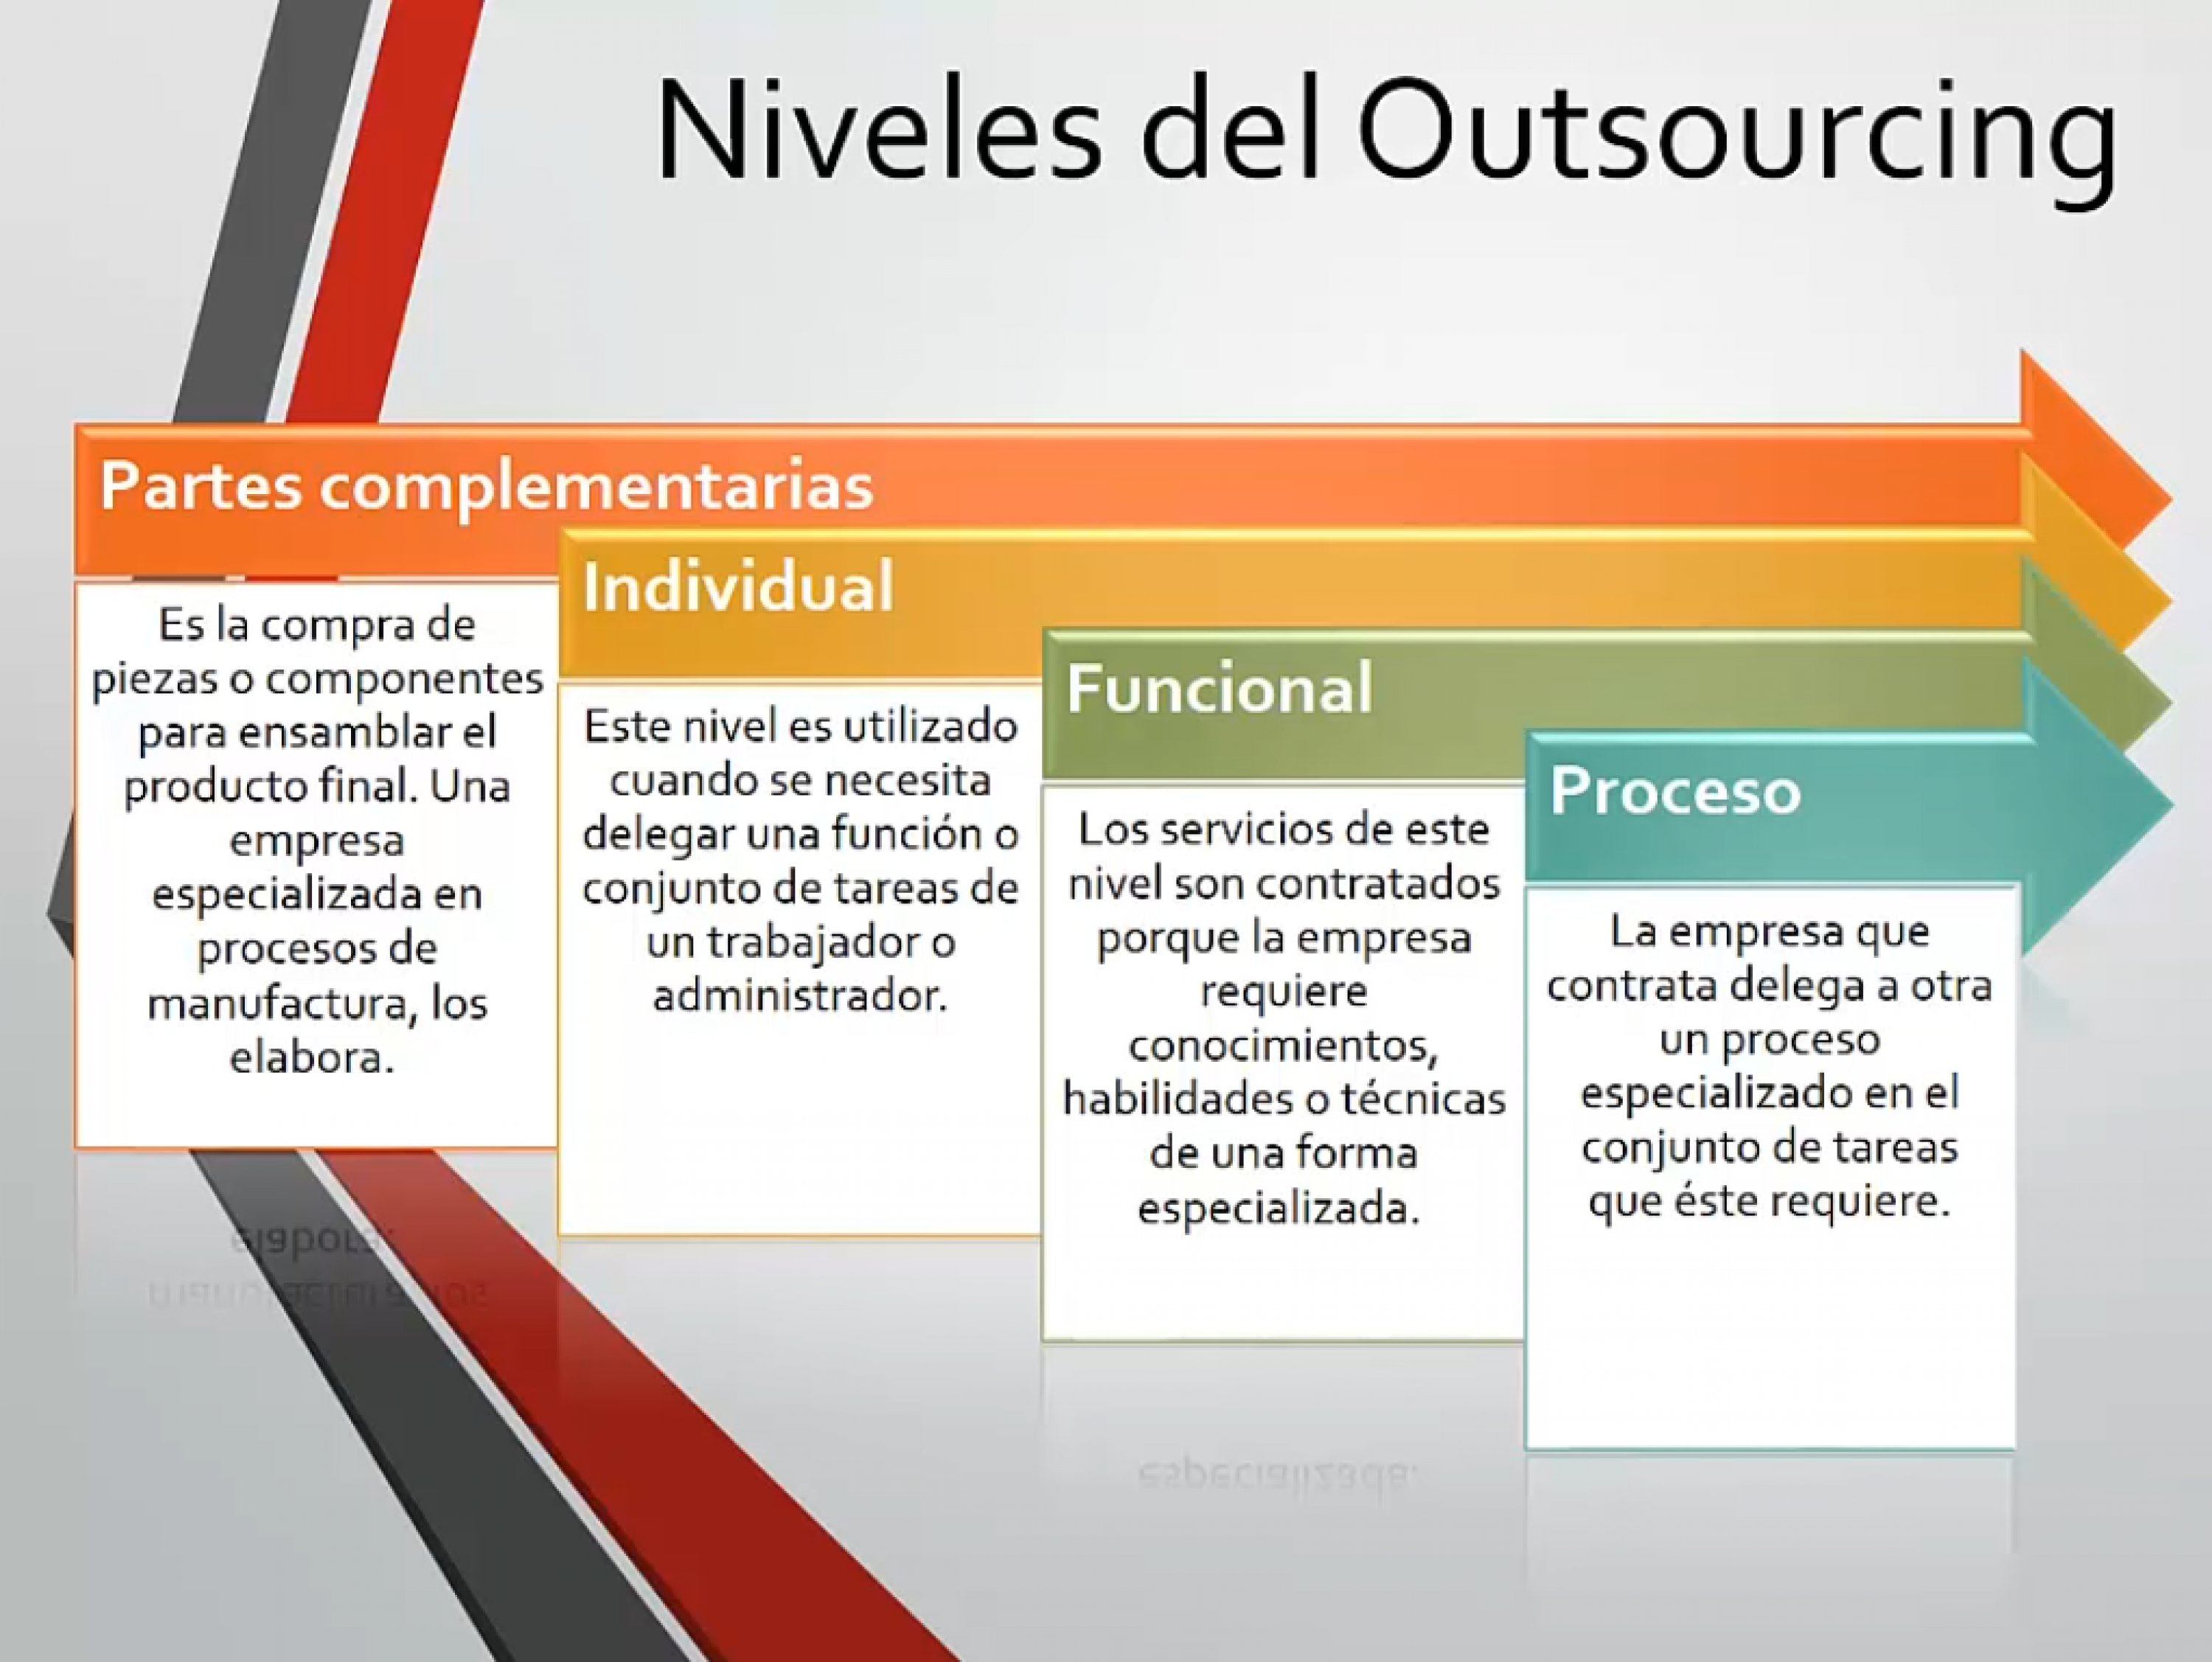 Niveles del Outsourcing